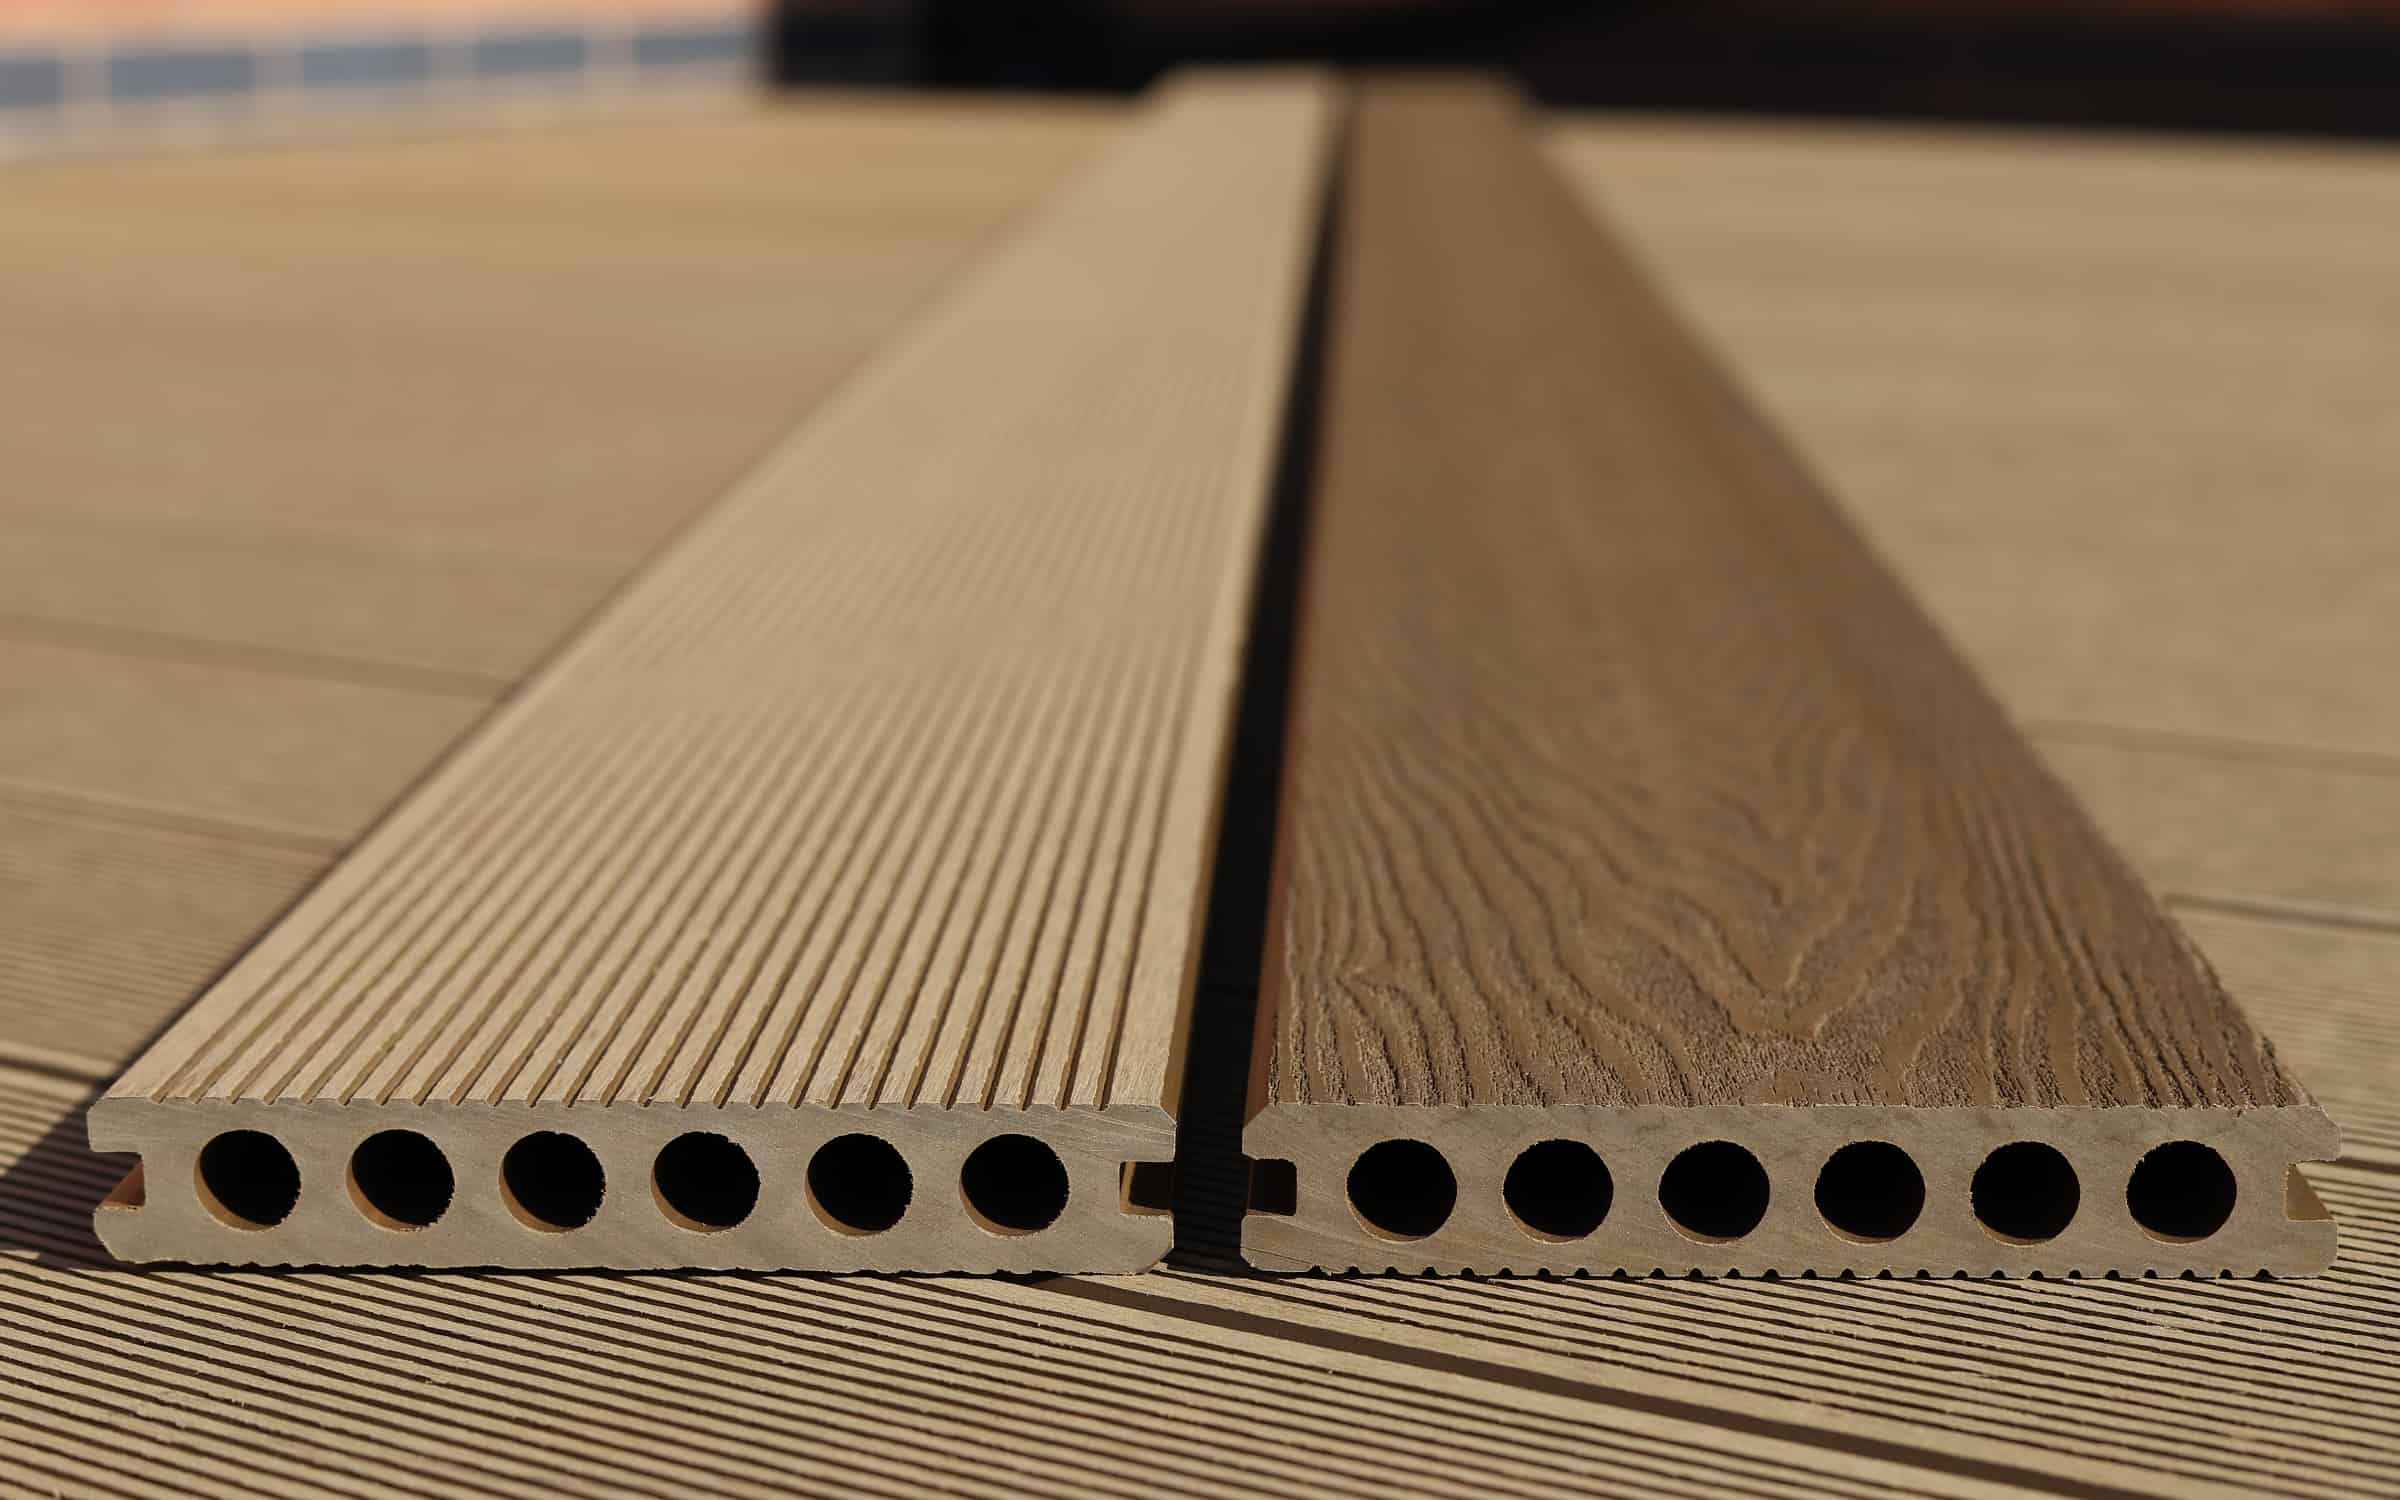 Why Does Composite Decking Have Grooves On The Bottom